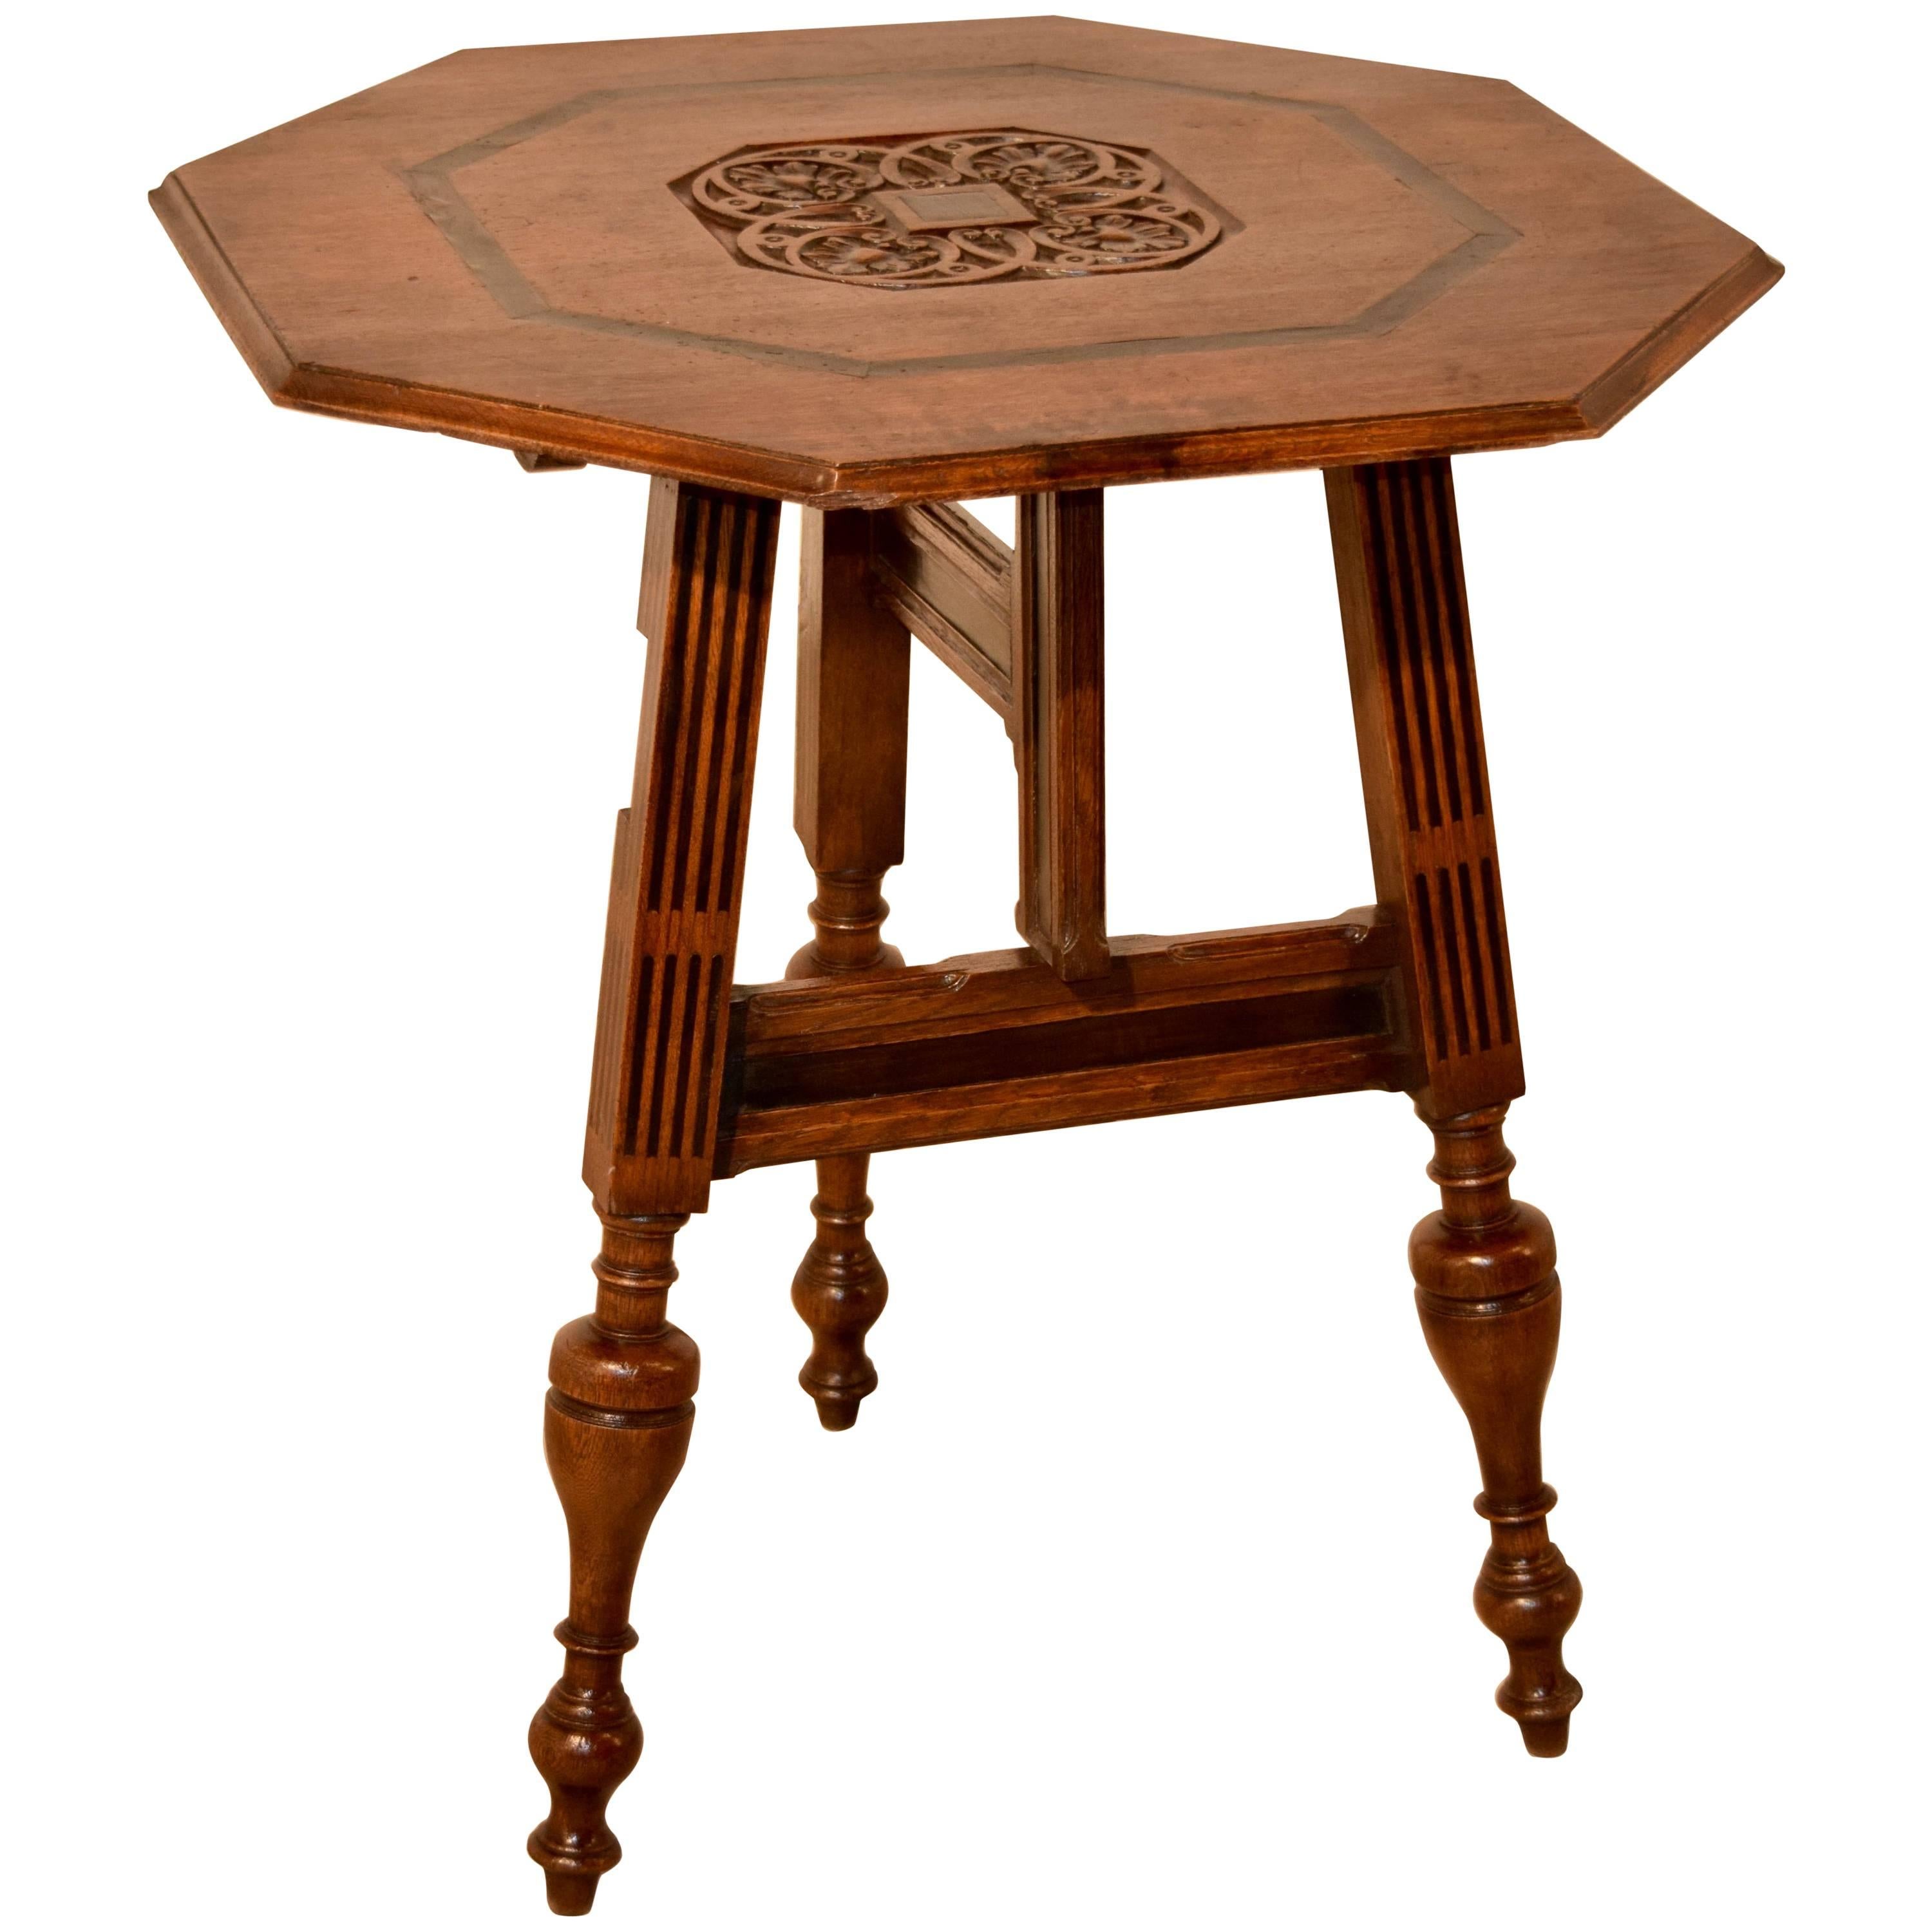 19th Century Dutch Carriage Table